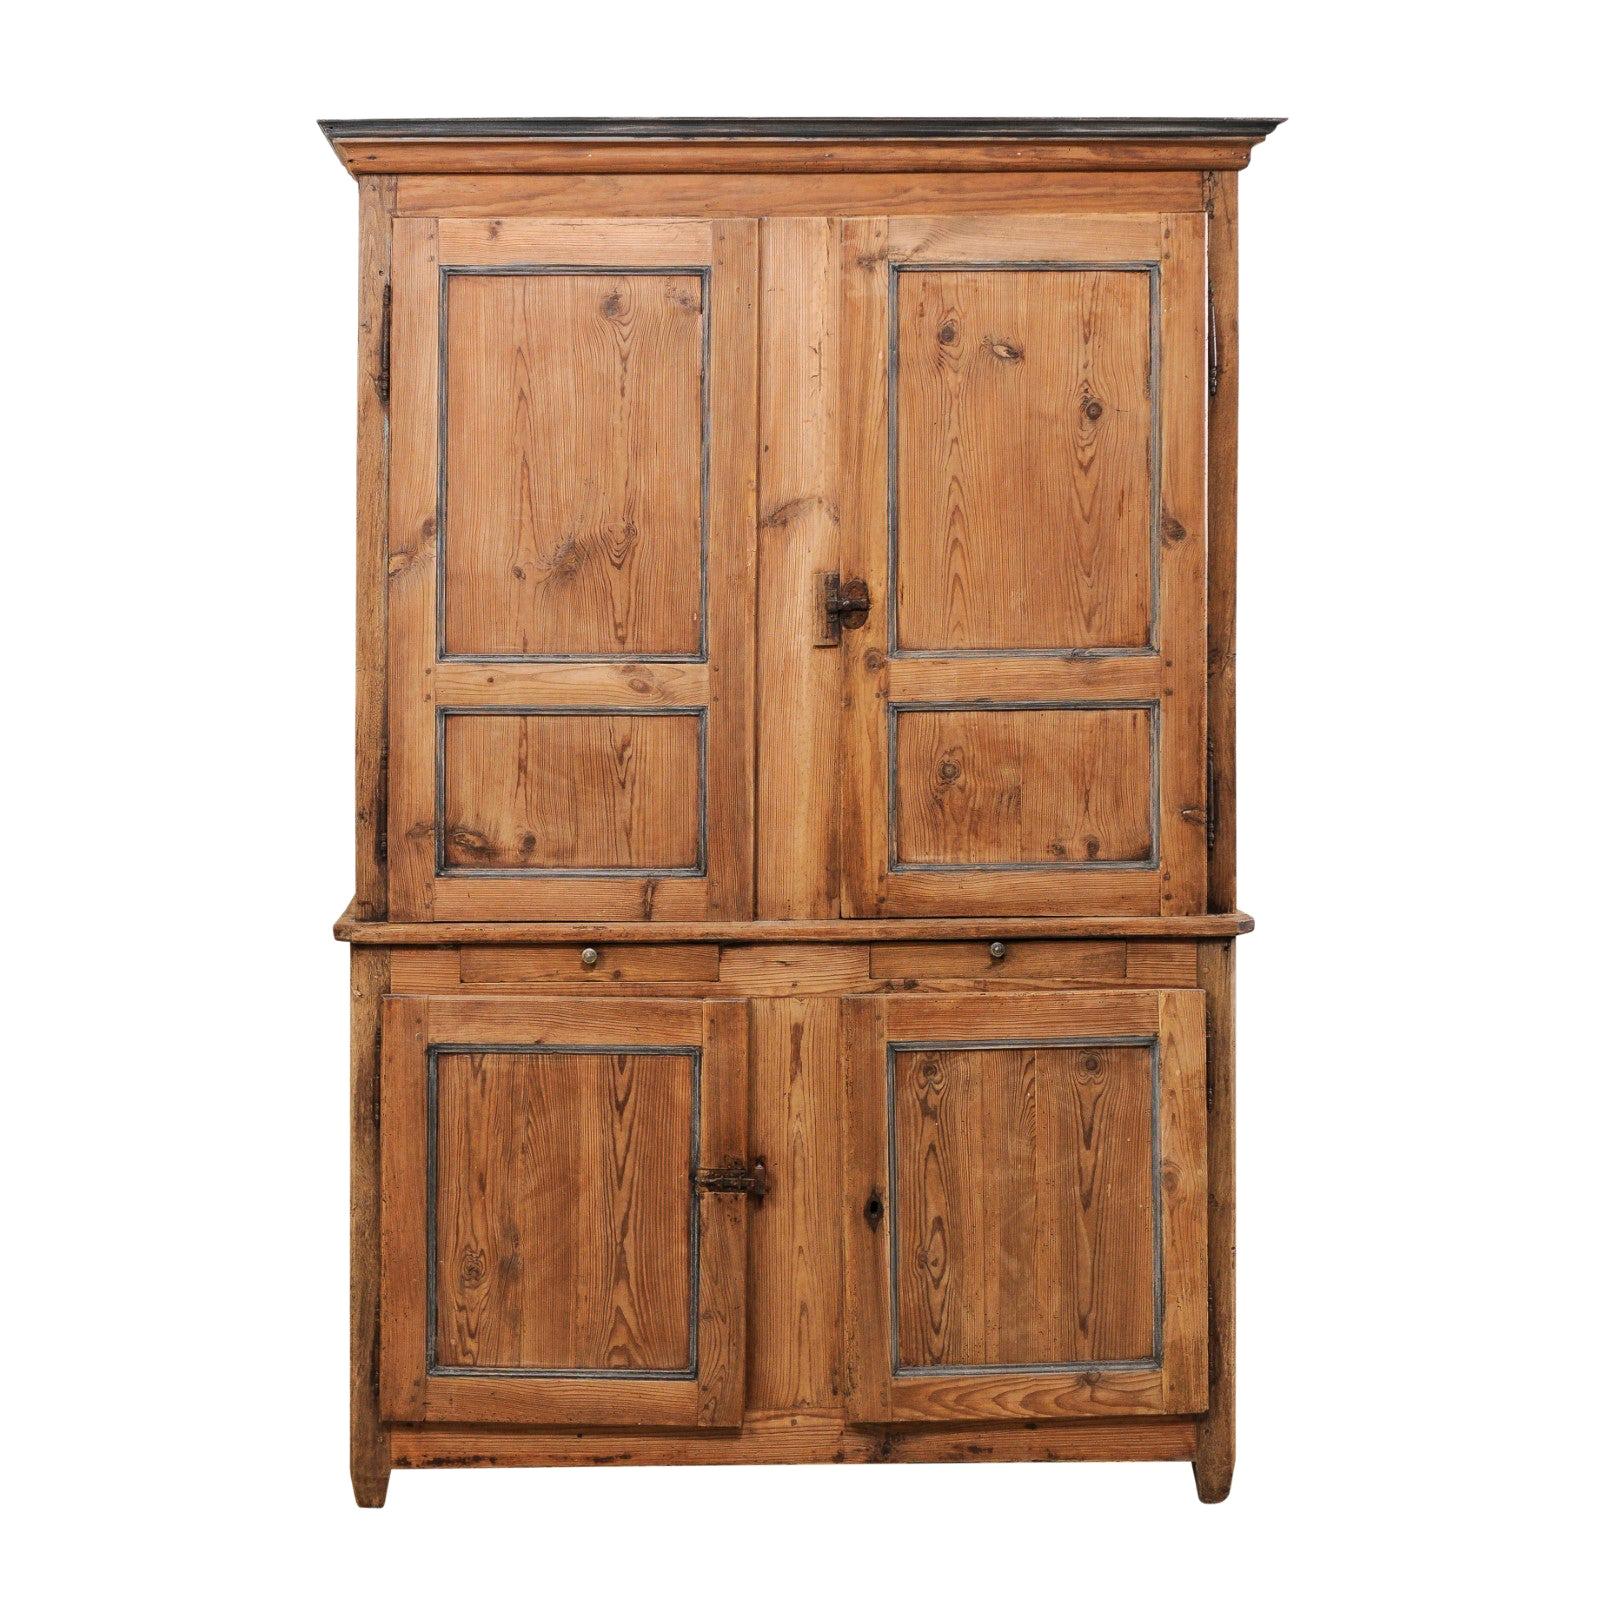 Early 19th Century Tall French Storage Cabinet w/ Molded Cornice & Paneled Doors